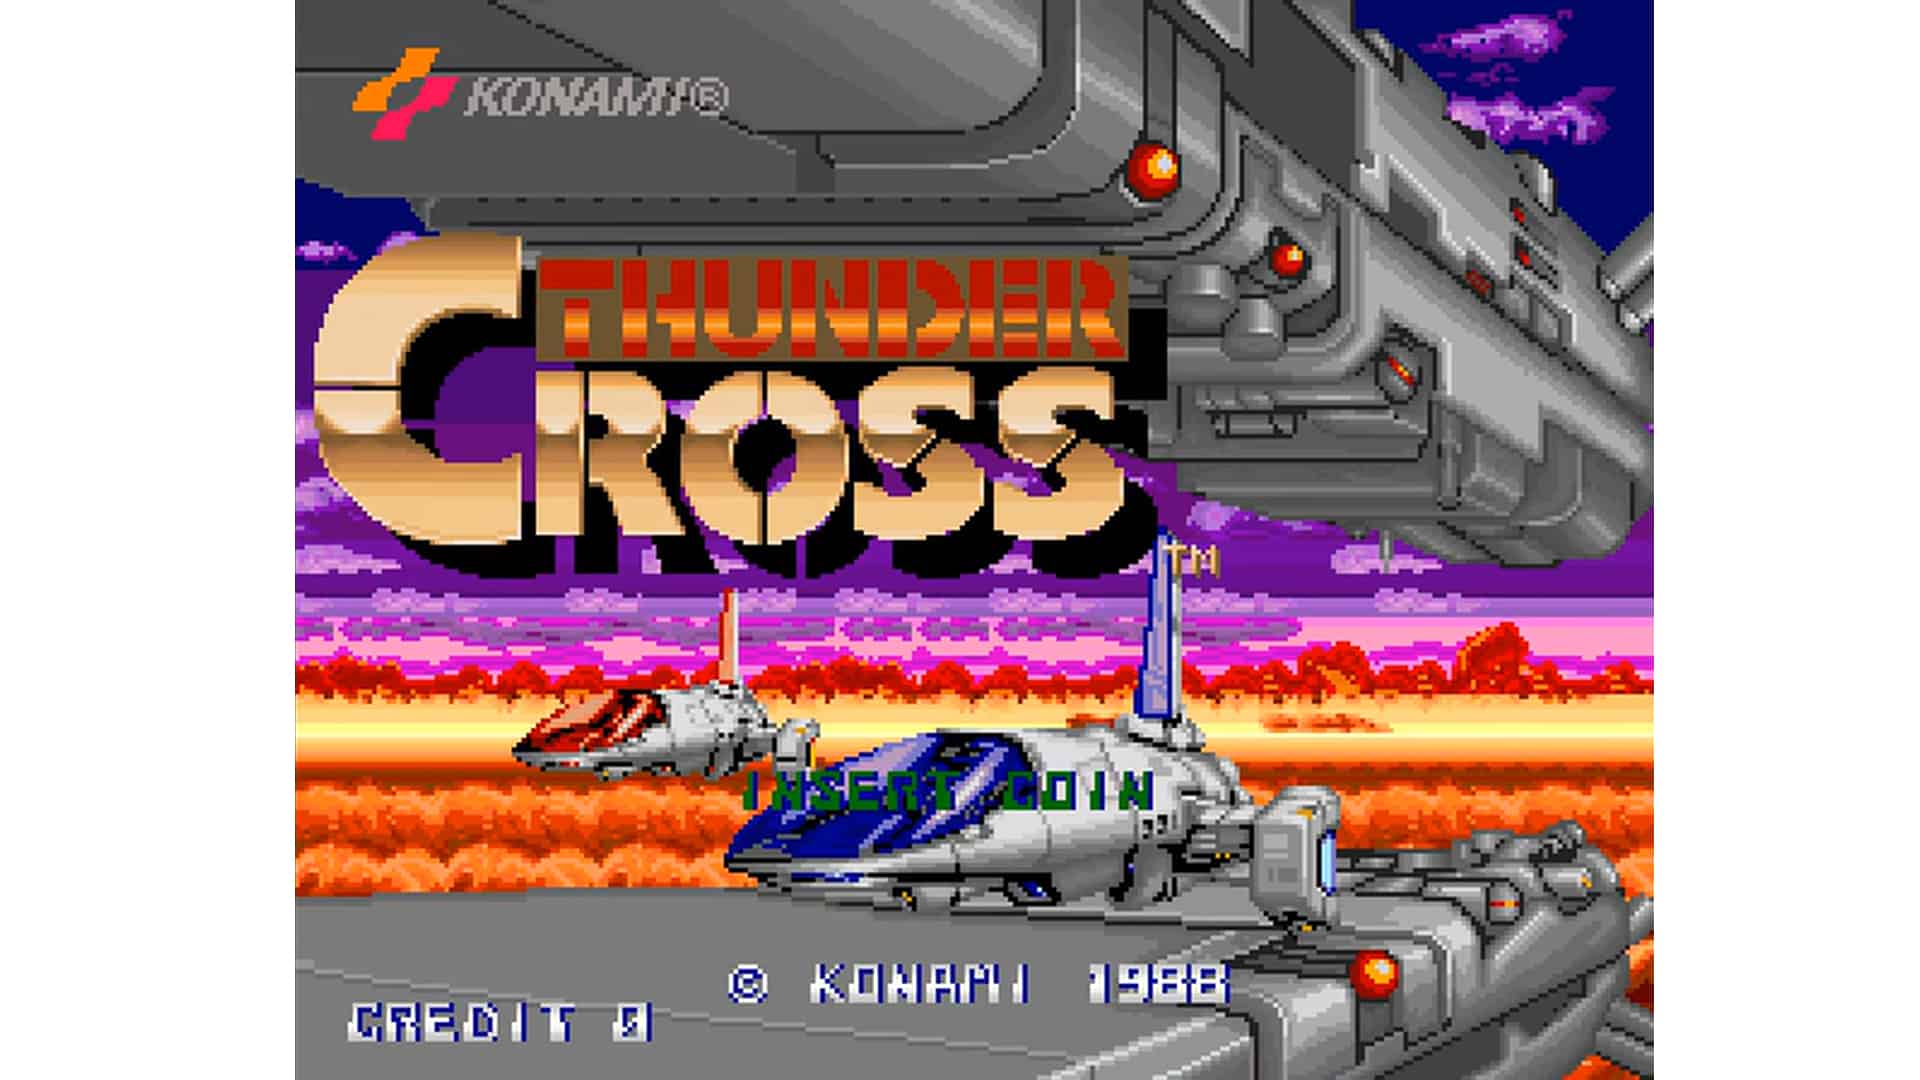 An in-game screenshot from Thunder Cross.